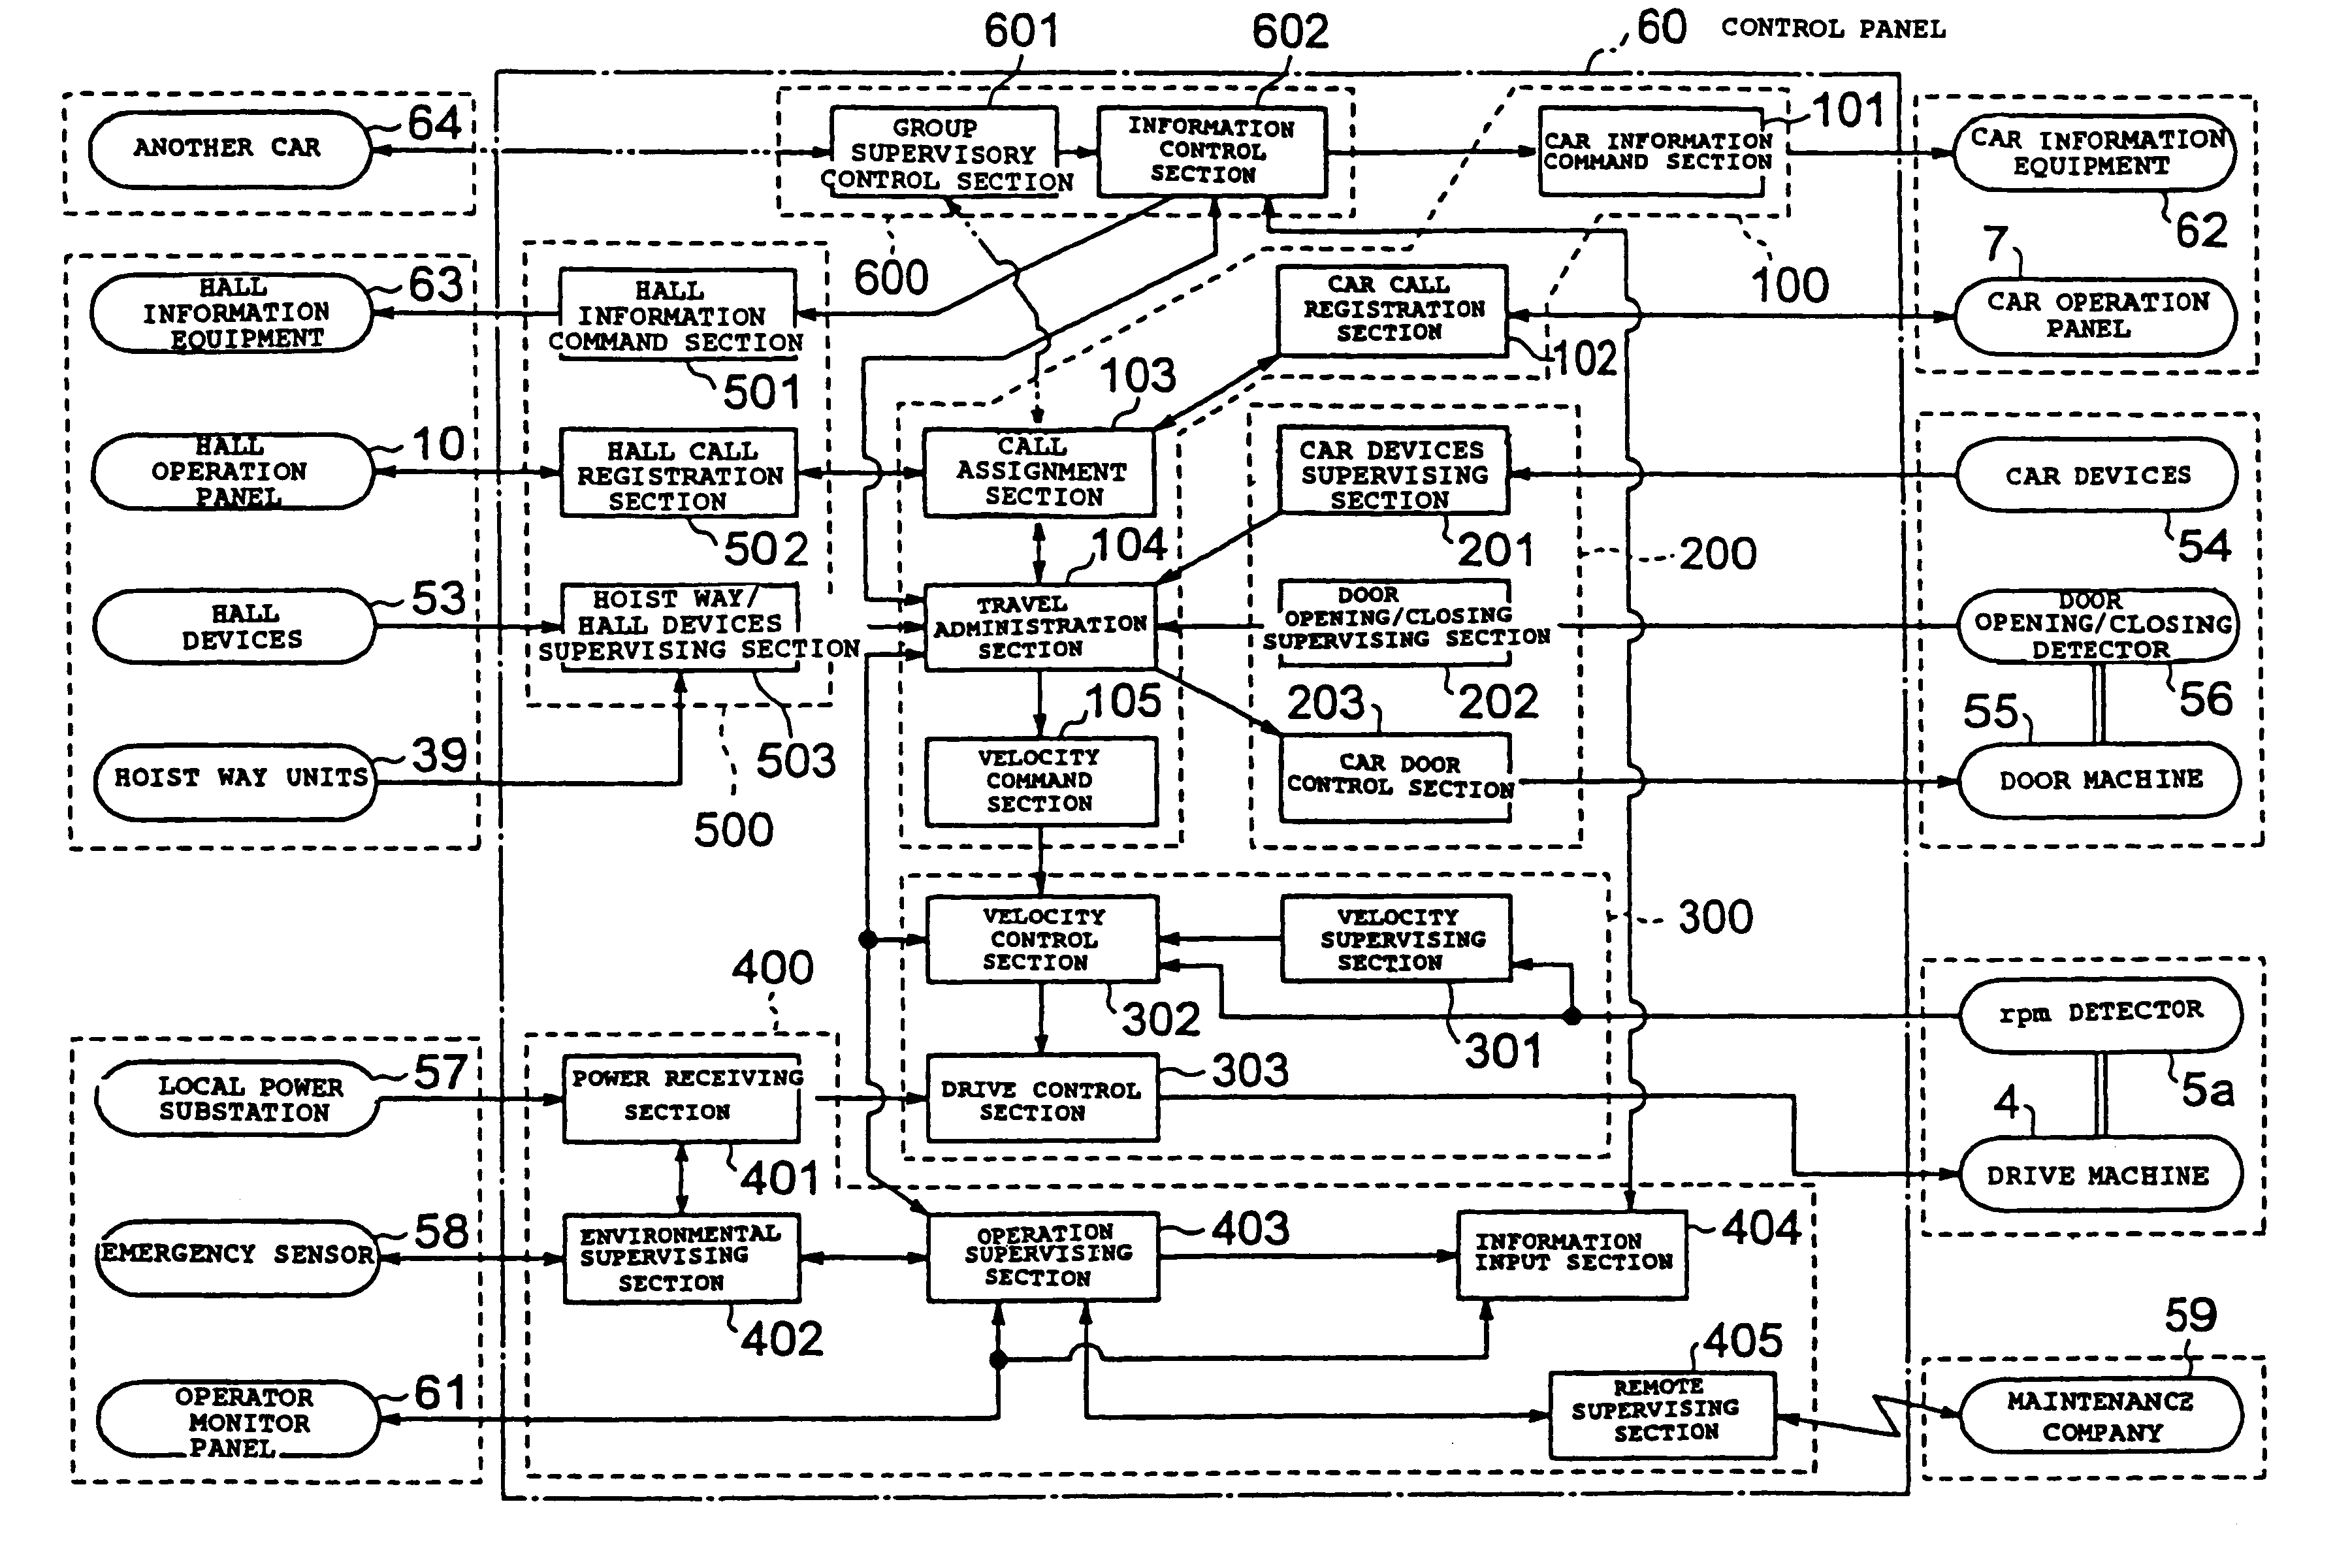 Controlling apparatus for elevator with divided control panel